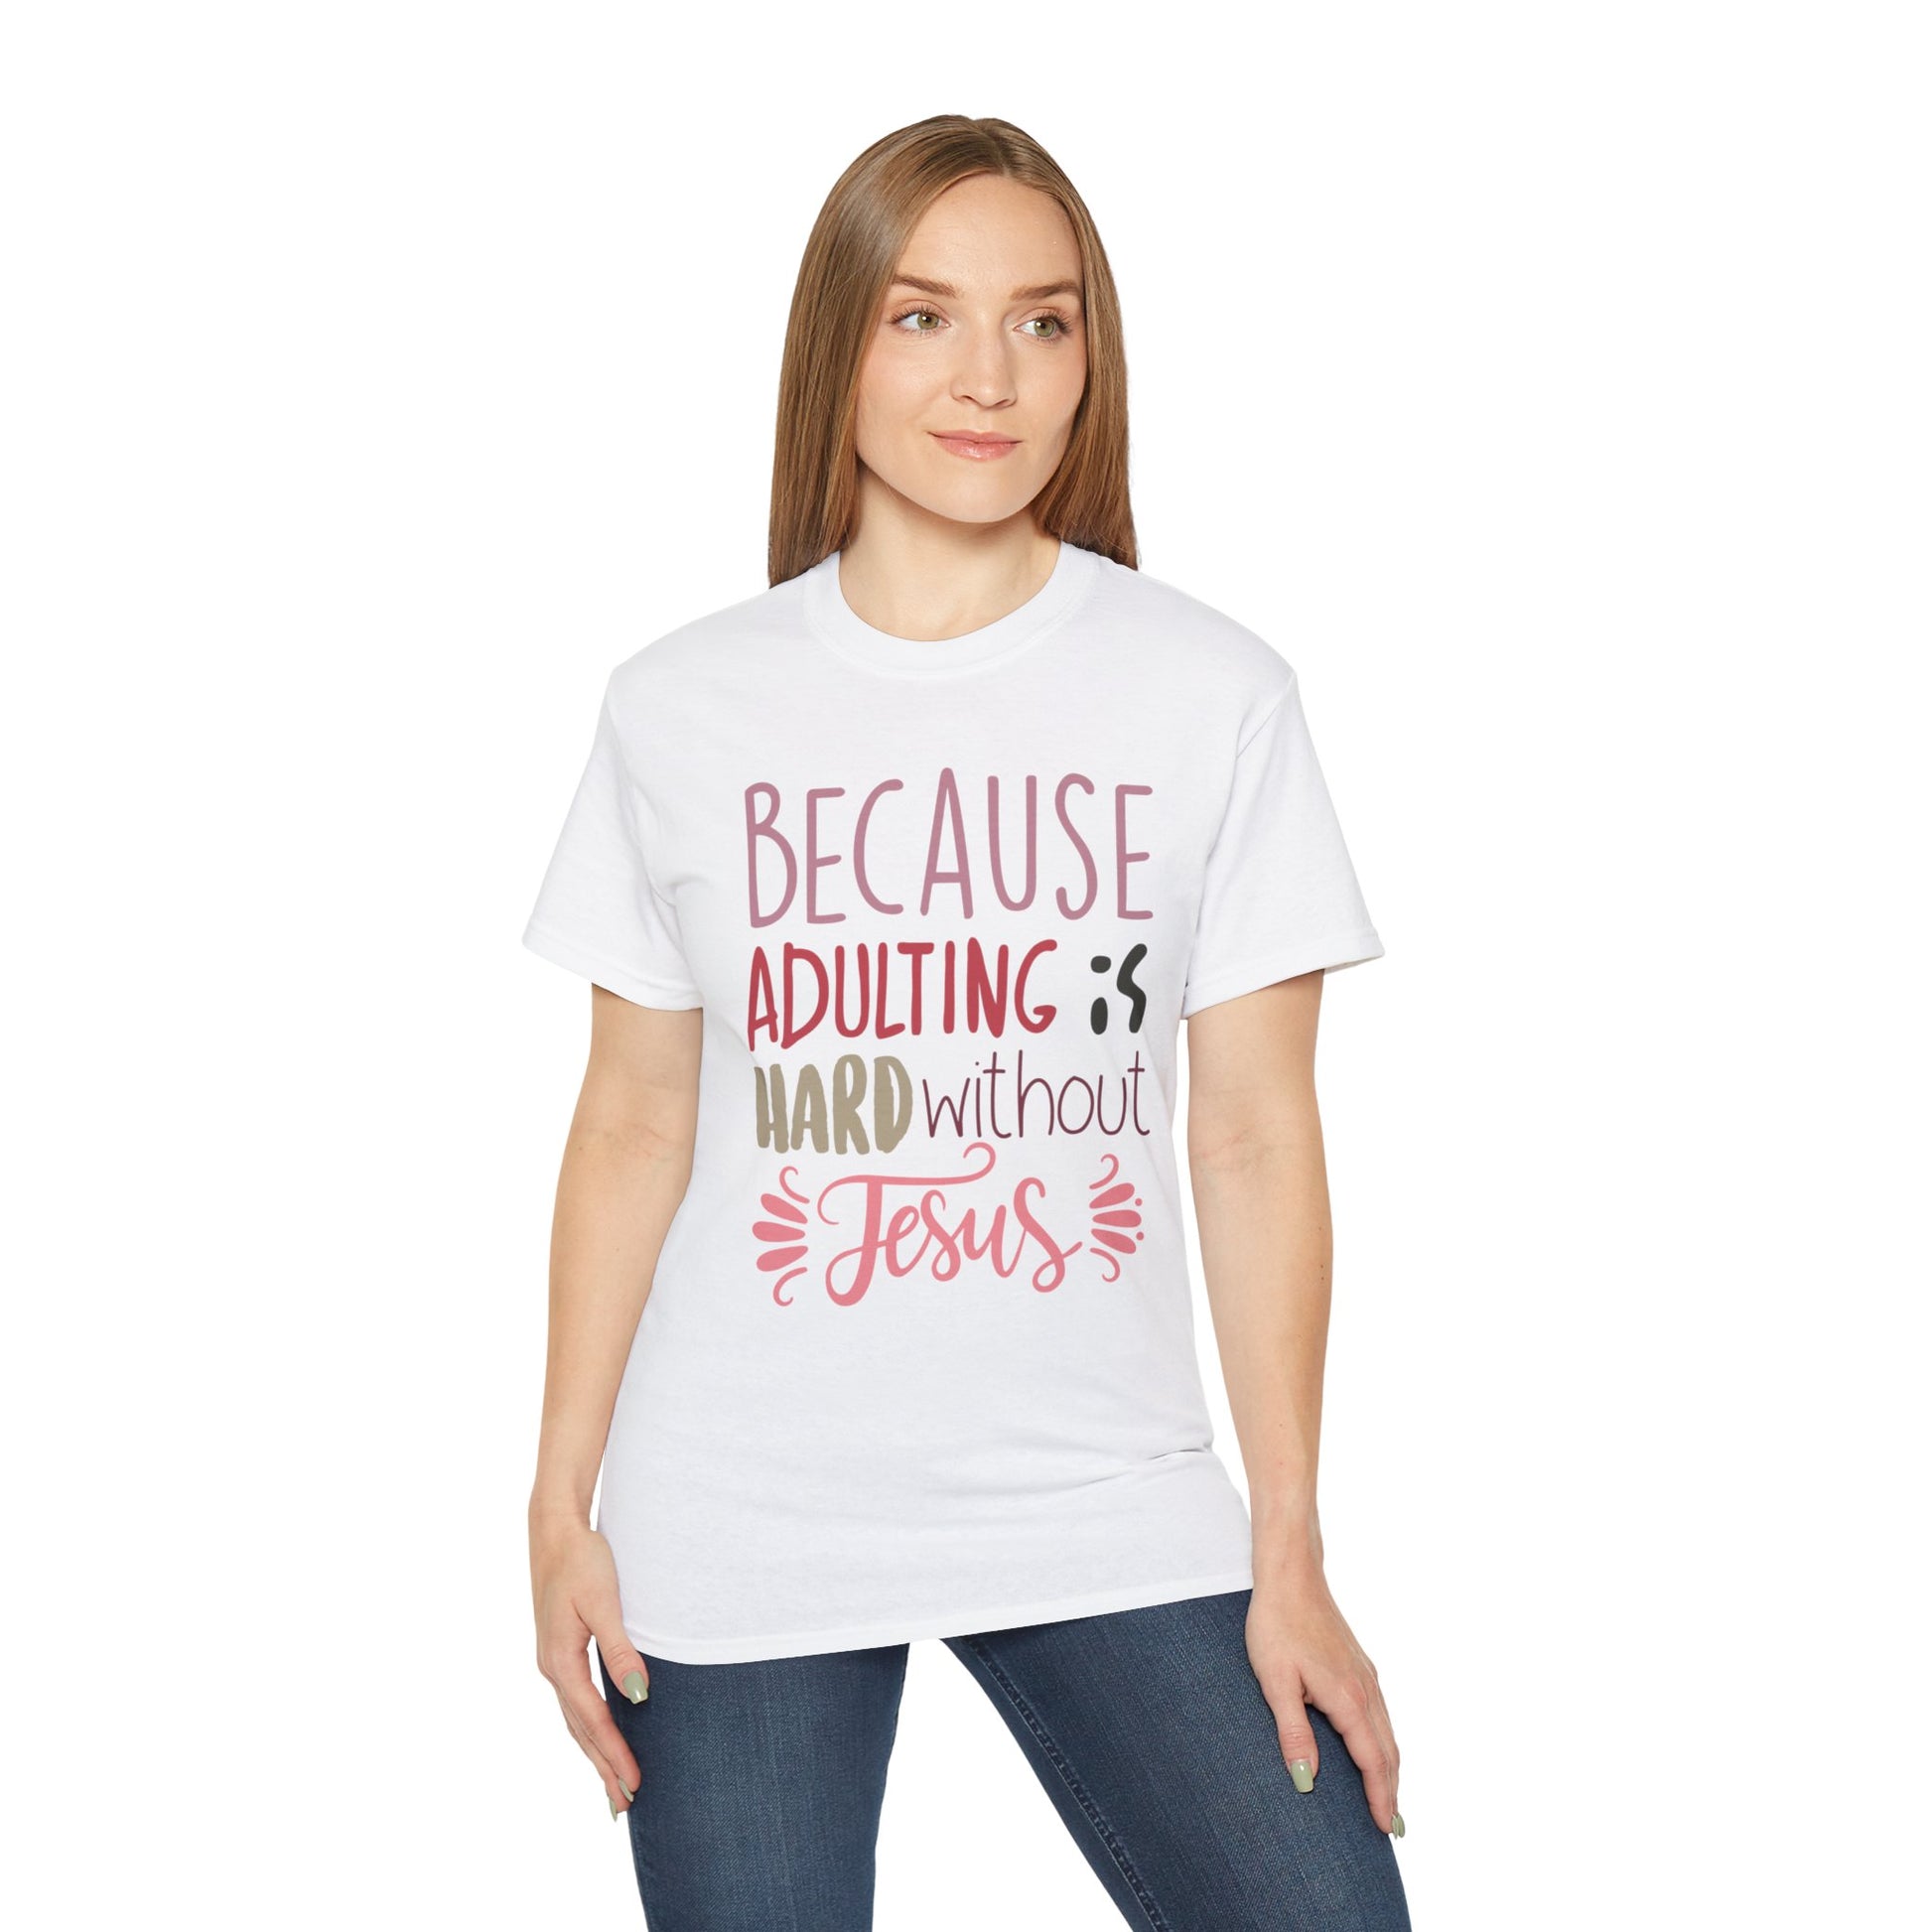 woman in white shirt with words "Because Adulting is Hard without Jesus"